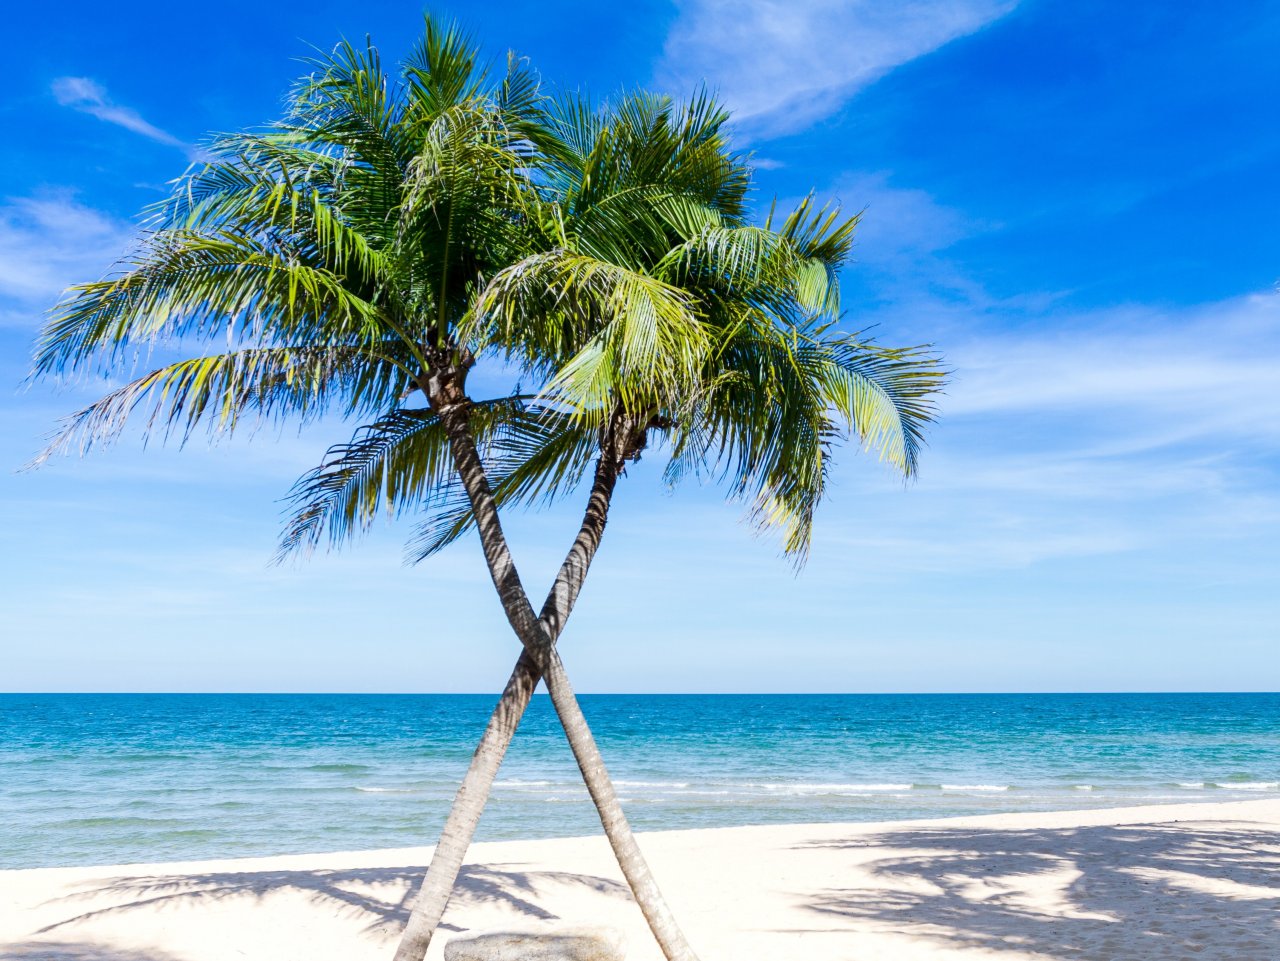 Palm Trees on the Beach jigsaw puzzle